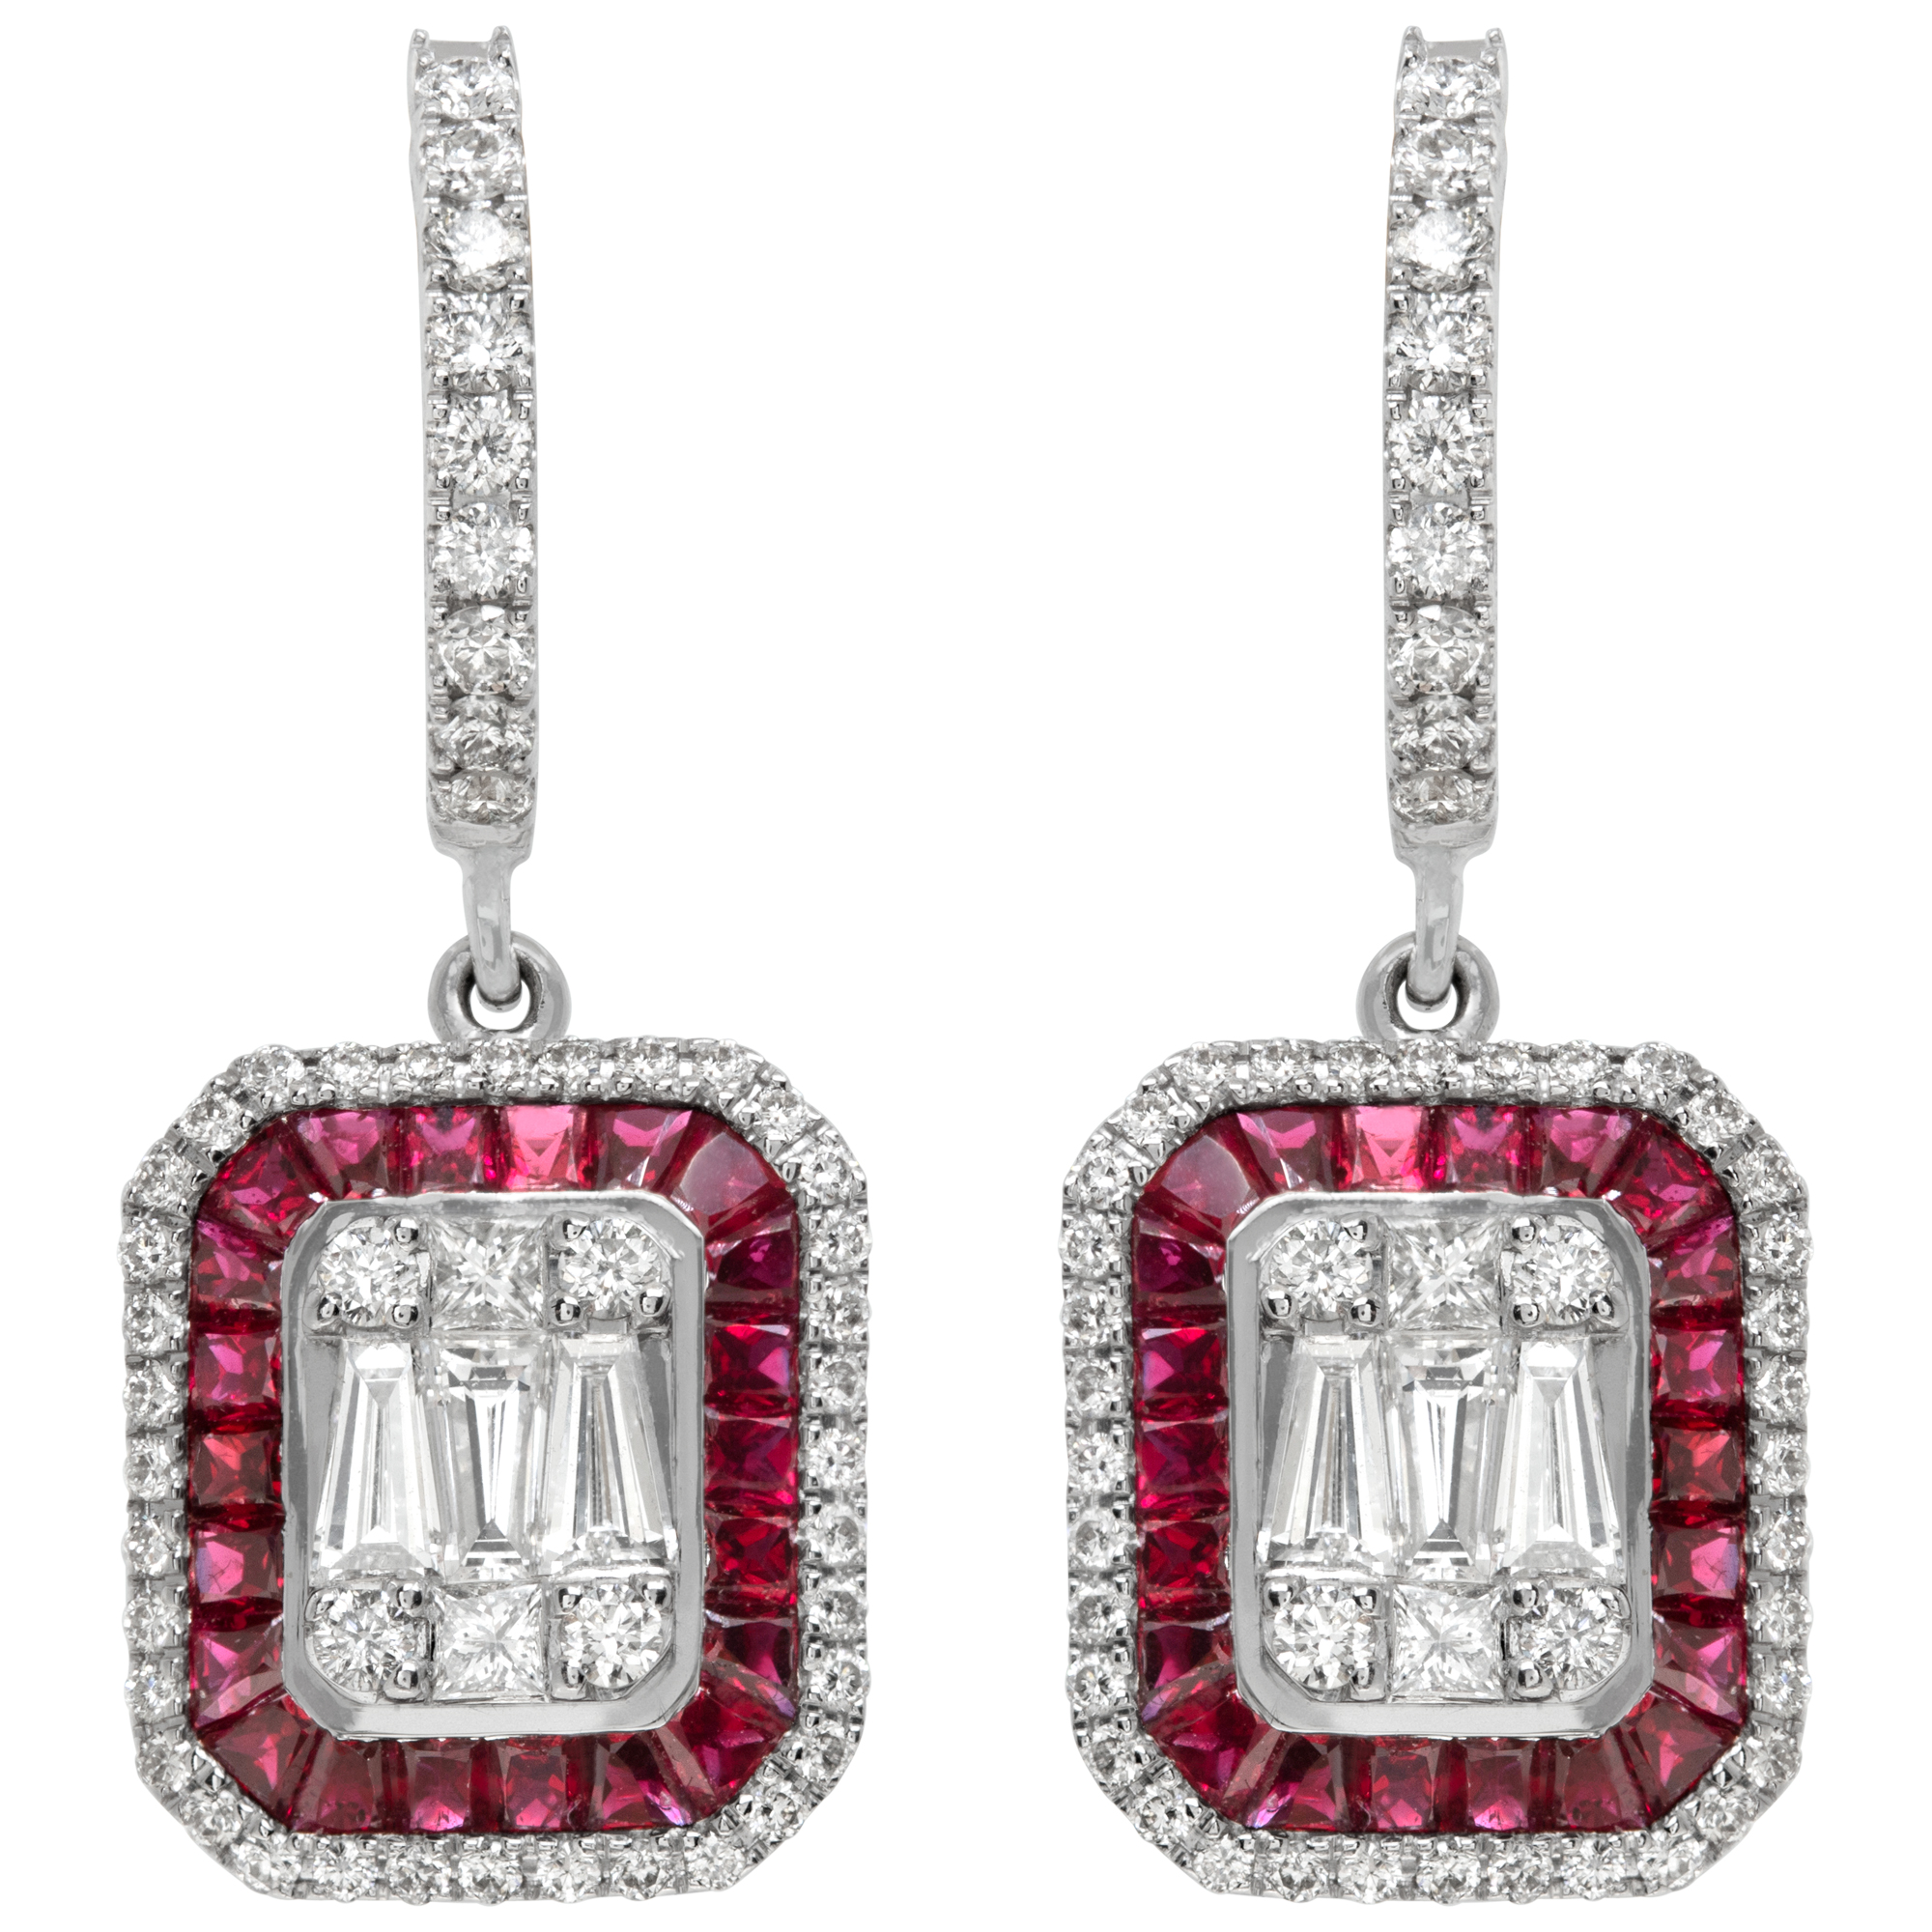 Diamond and ruby earrings in 18k white gold with approx. 1.41 carat in diamonds (Stones)